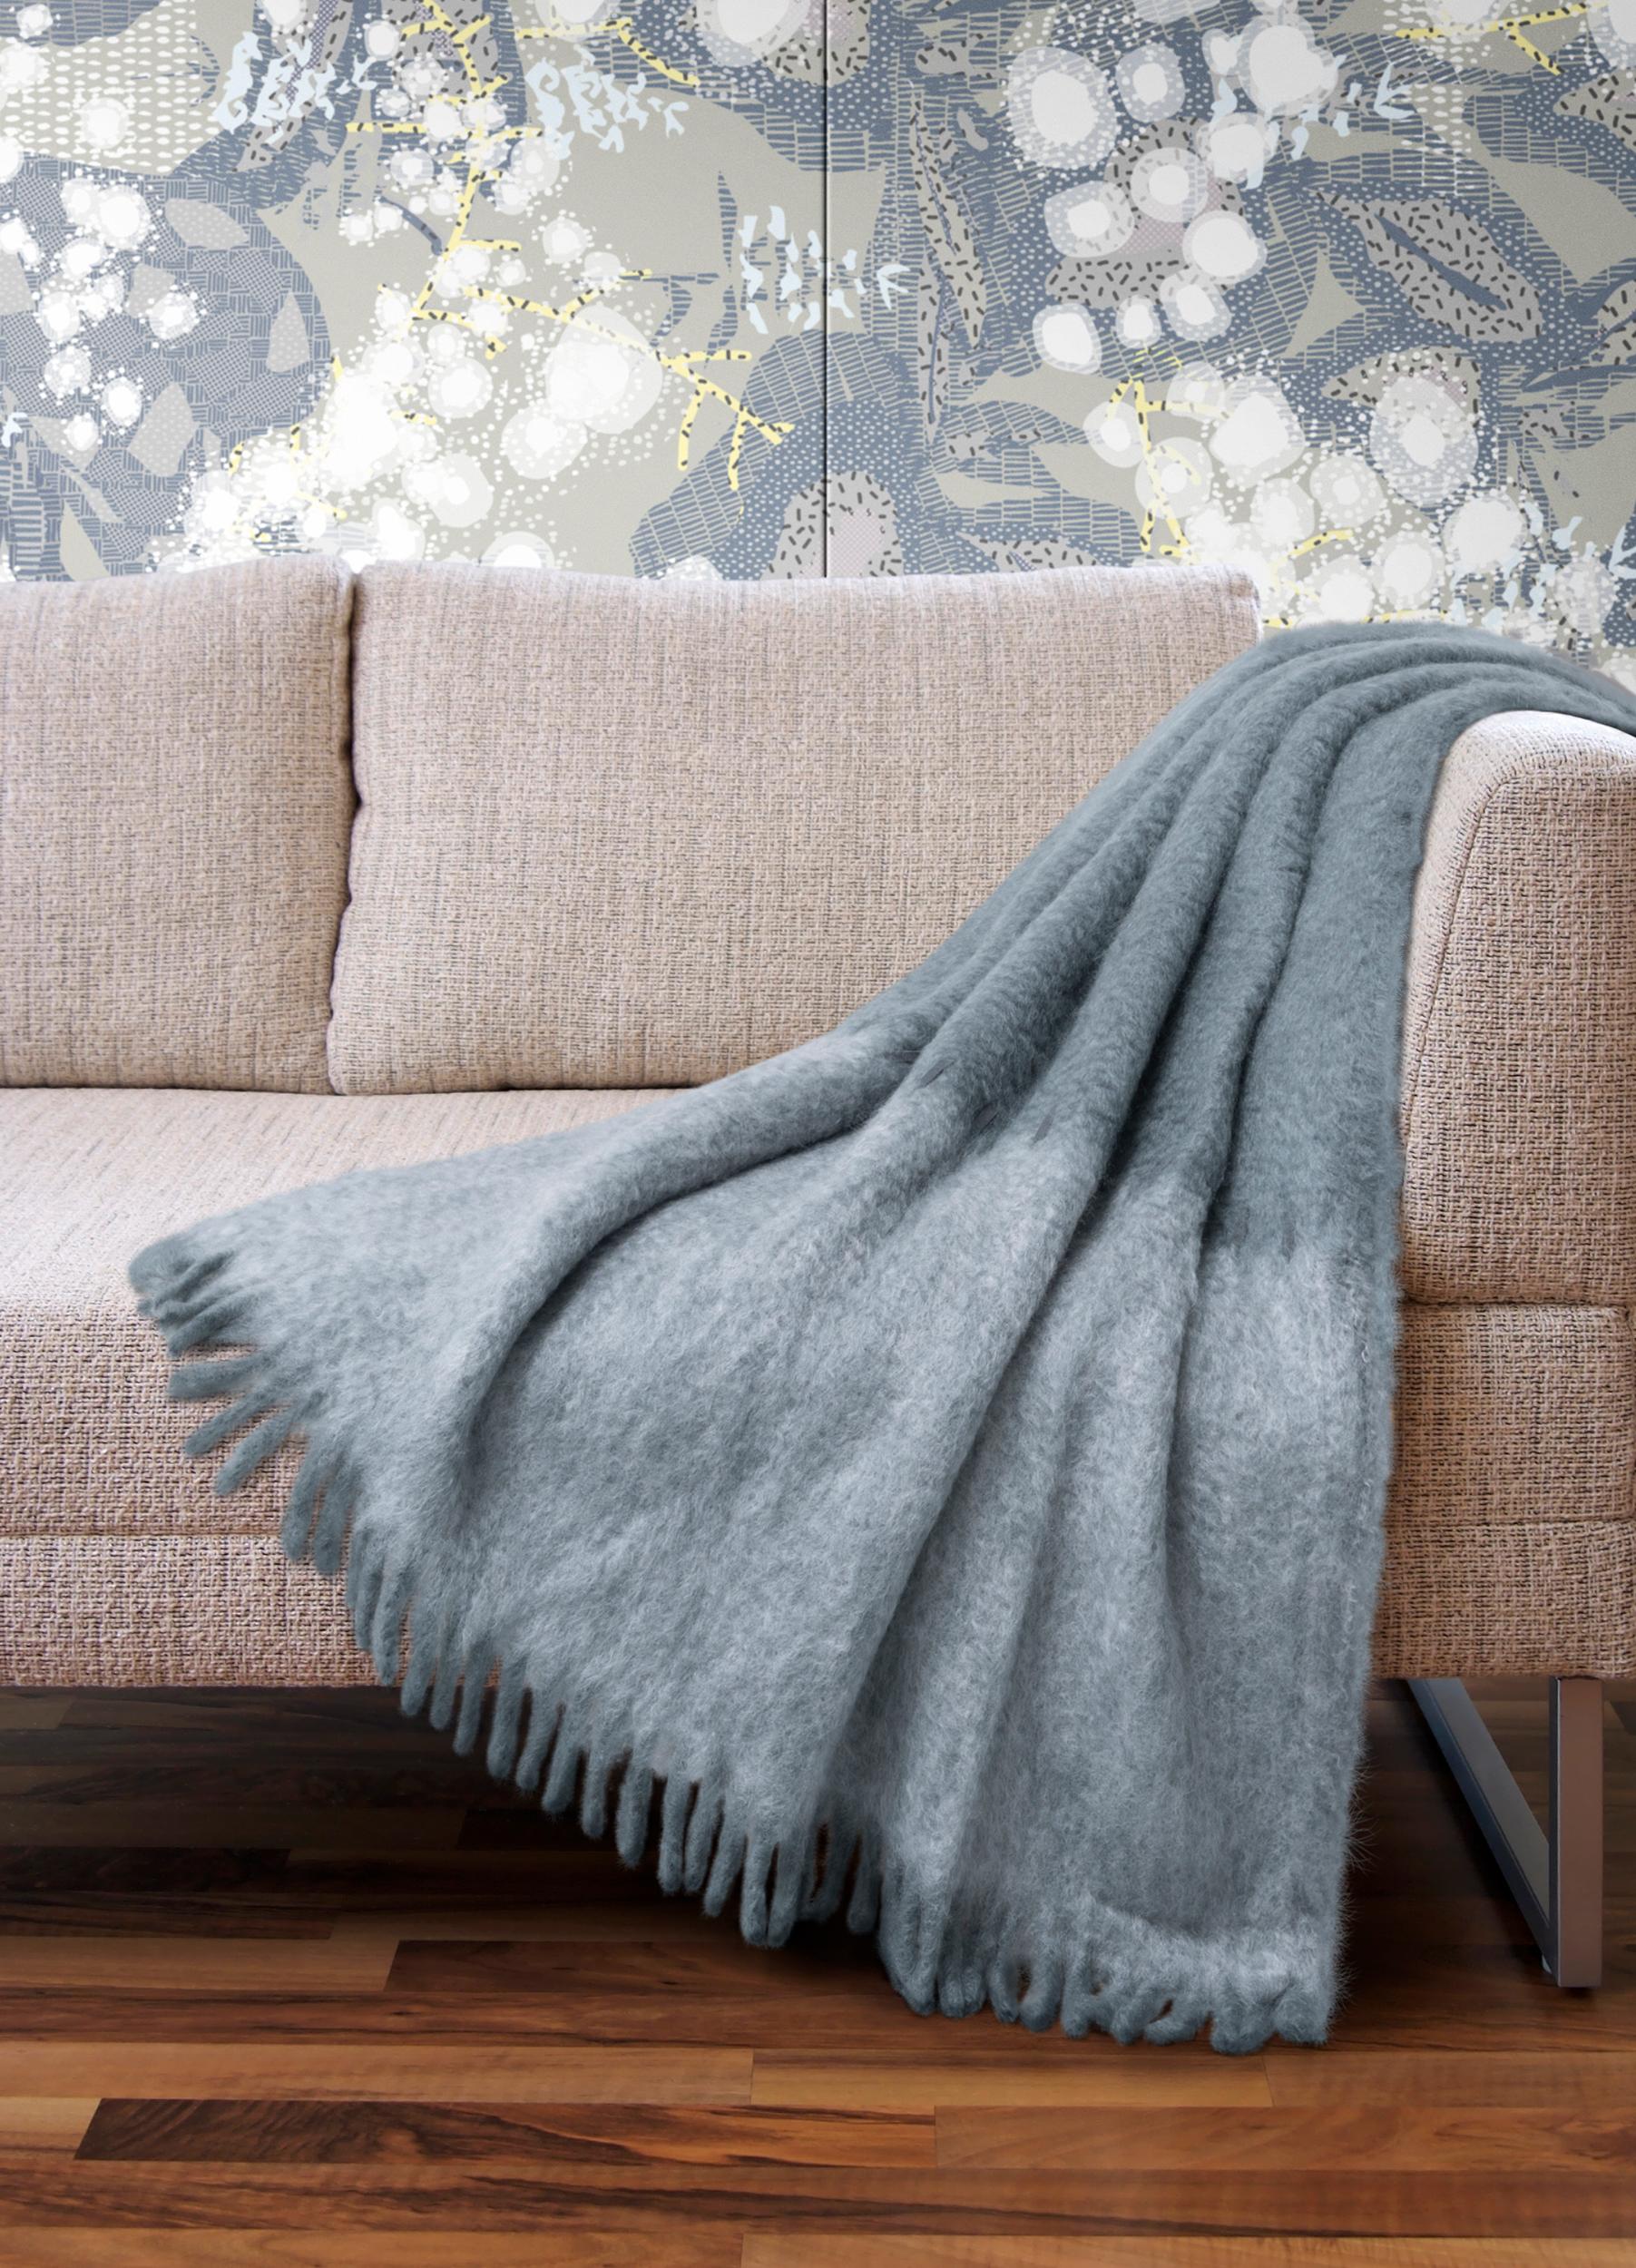 Discreet yet with character, the Cortina Mohair plaid ensures a soft final touch to any environment. Its elegance comes from the gentle fringes and contrasting ice grey and darker grey tonalities, underlined by a fine diagonal stitching. The natural